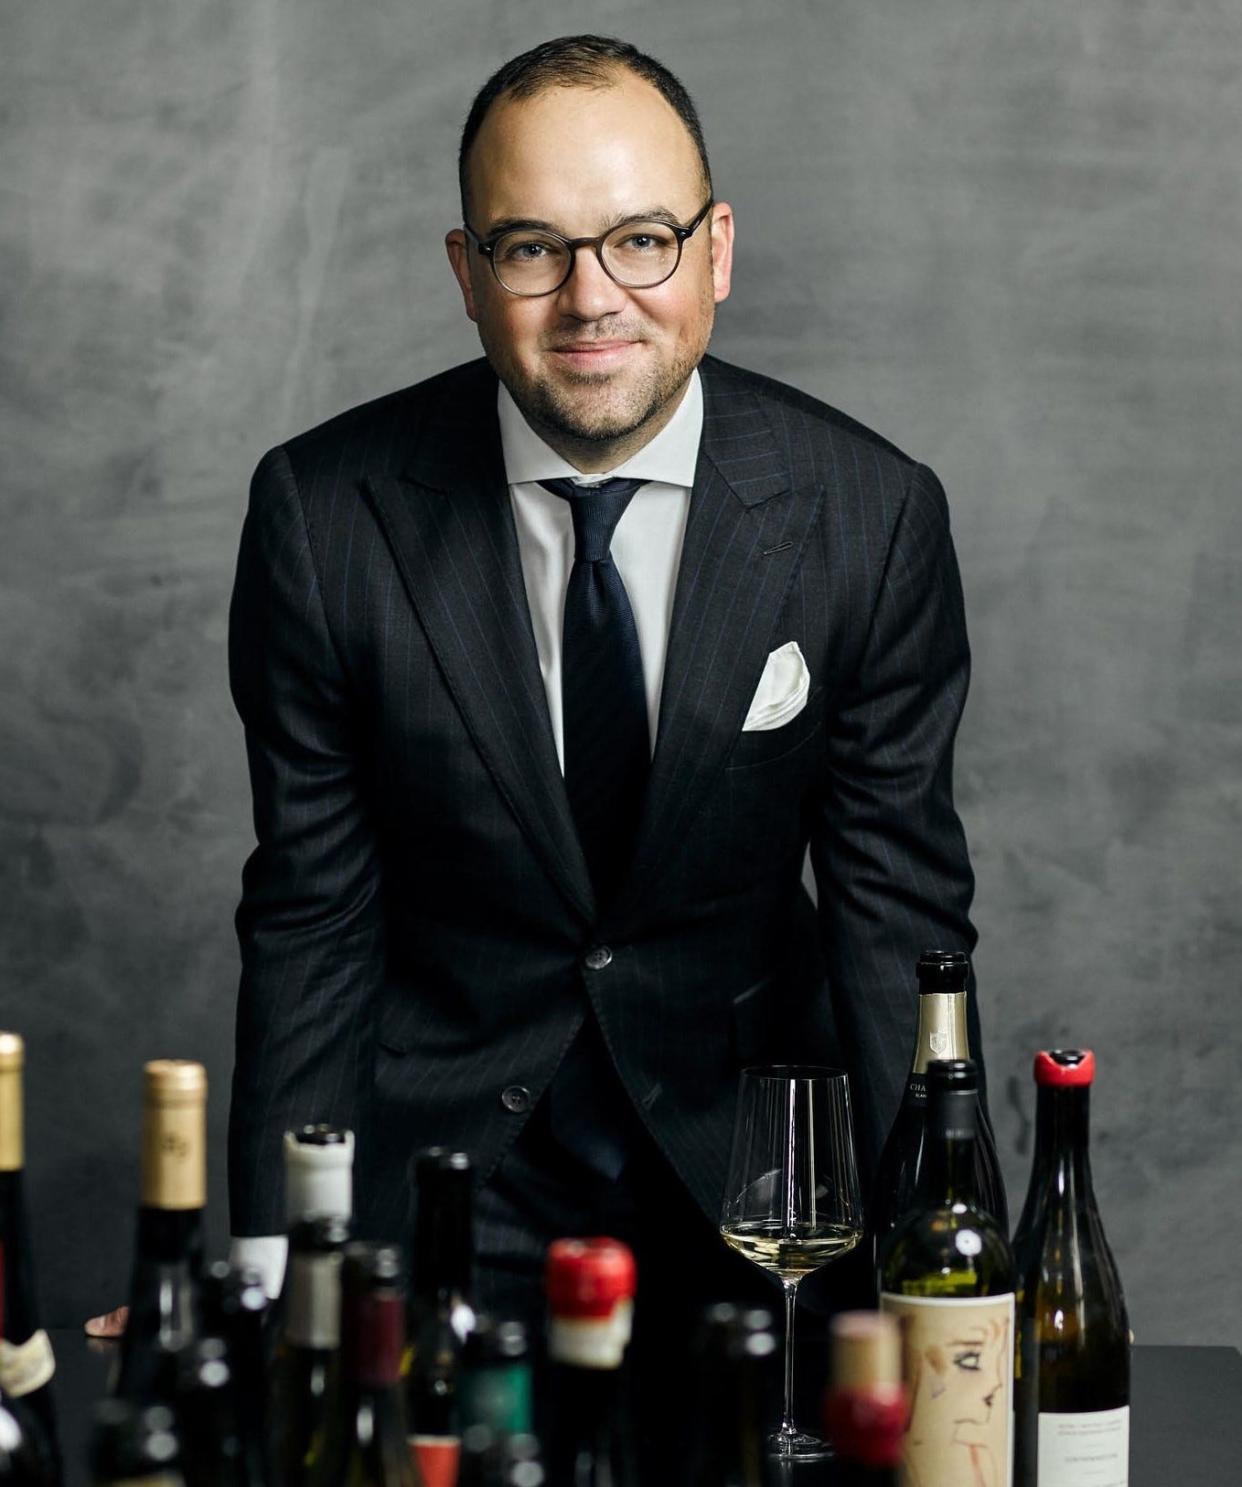 Sommelier Kevin Hart opened the first Hart & Cru brick-and-mortar location in the historic Pendelton neighborhood in 2021.